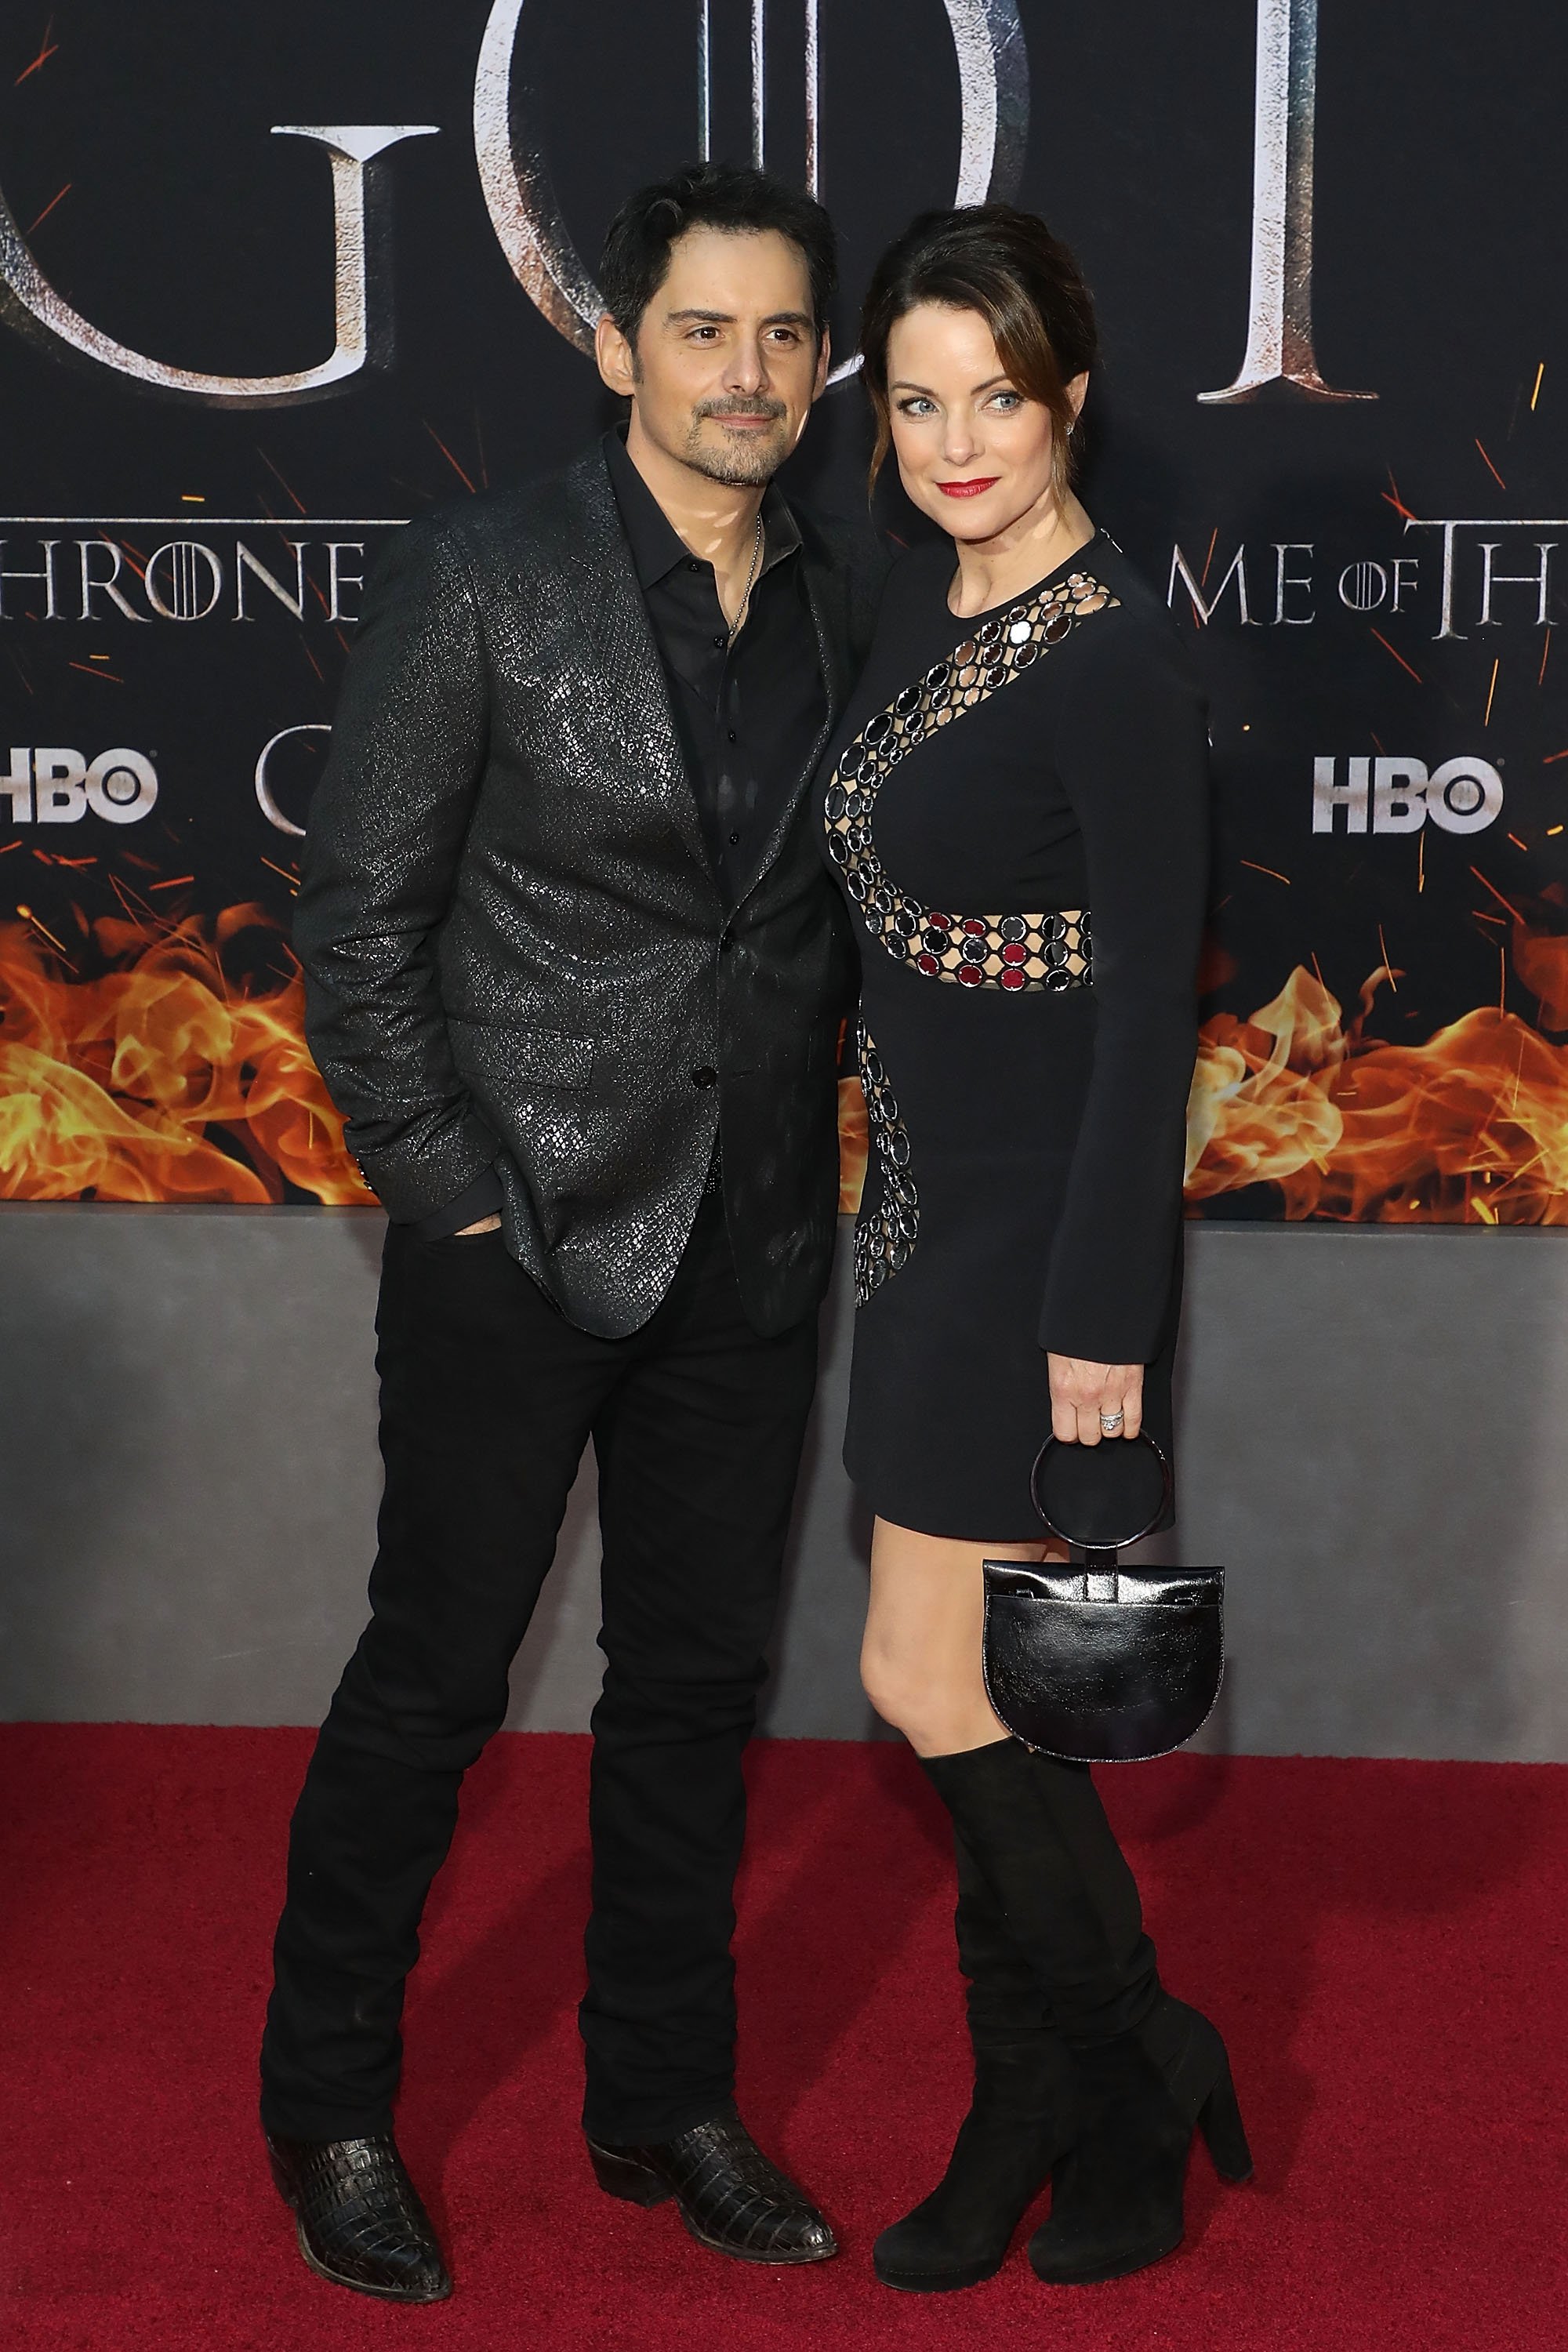 Brad Paisley and Kimberly Williams Paisley attend the Season 8 premiere of "Game of Thrones" at Radio City Music Hall on April 3, 2019, in New York City. | Source: Getty Images